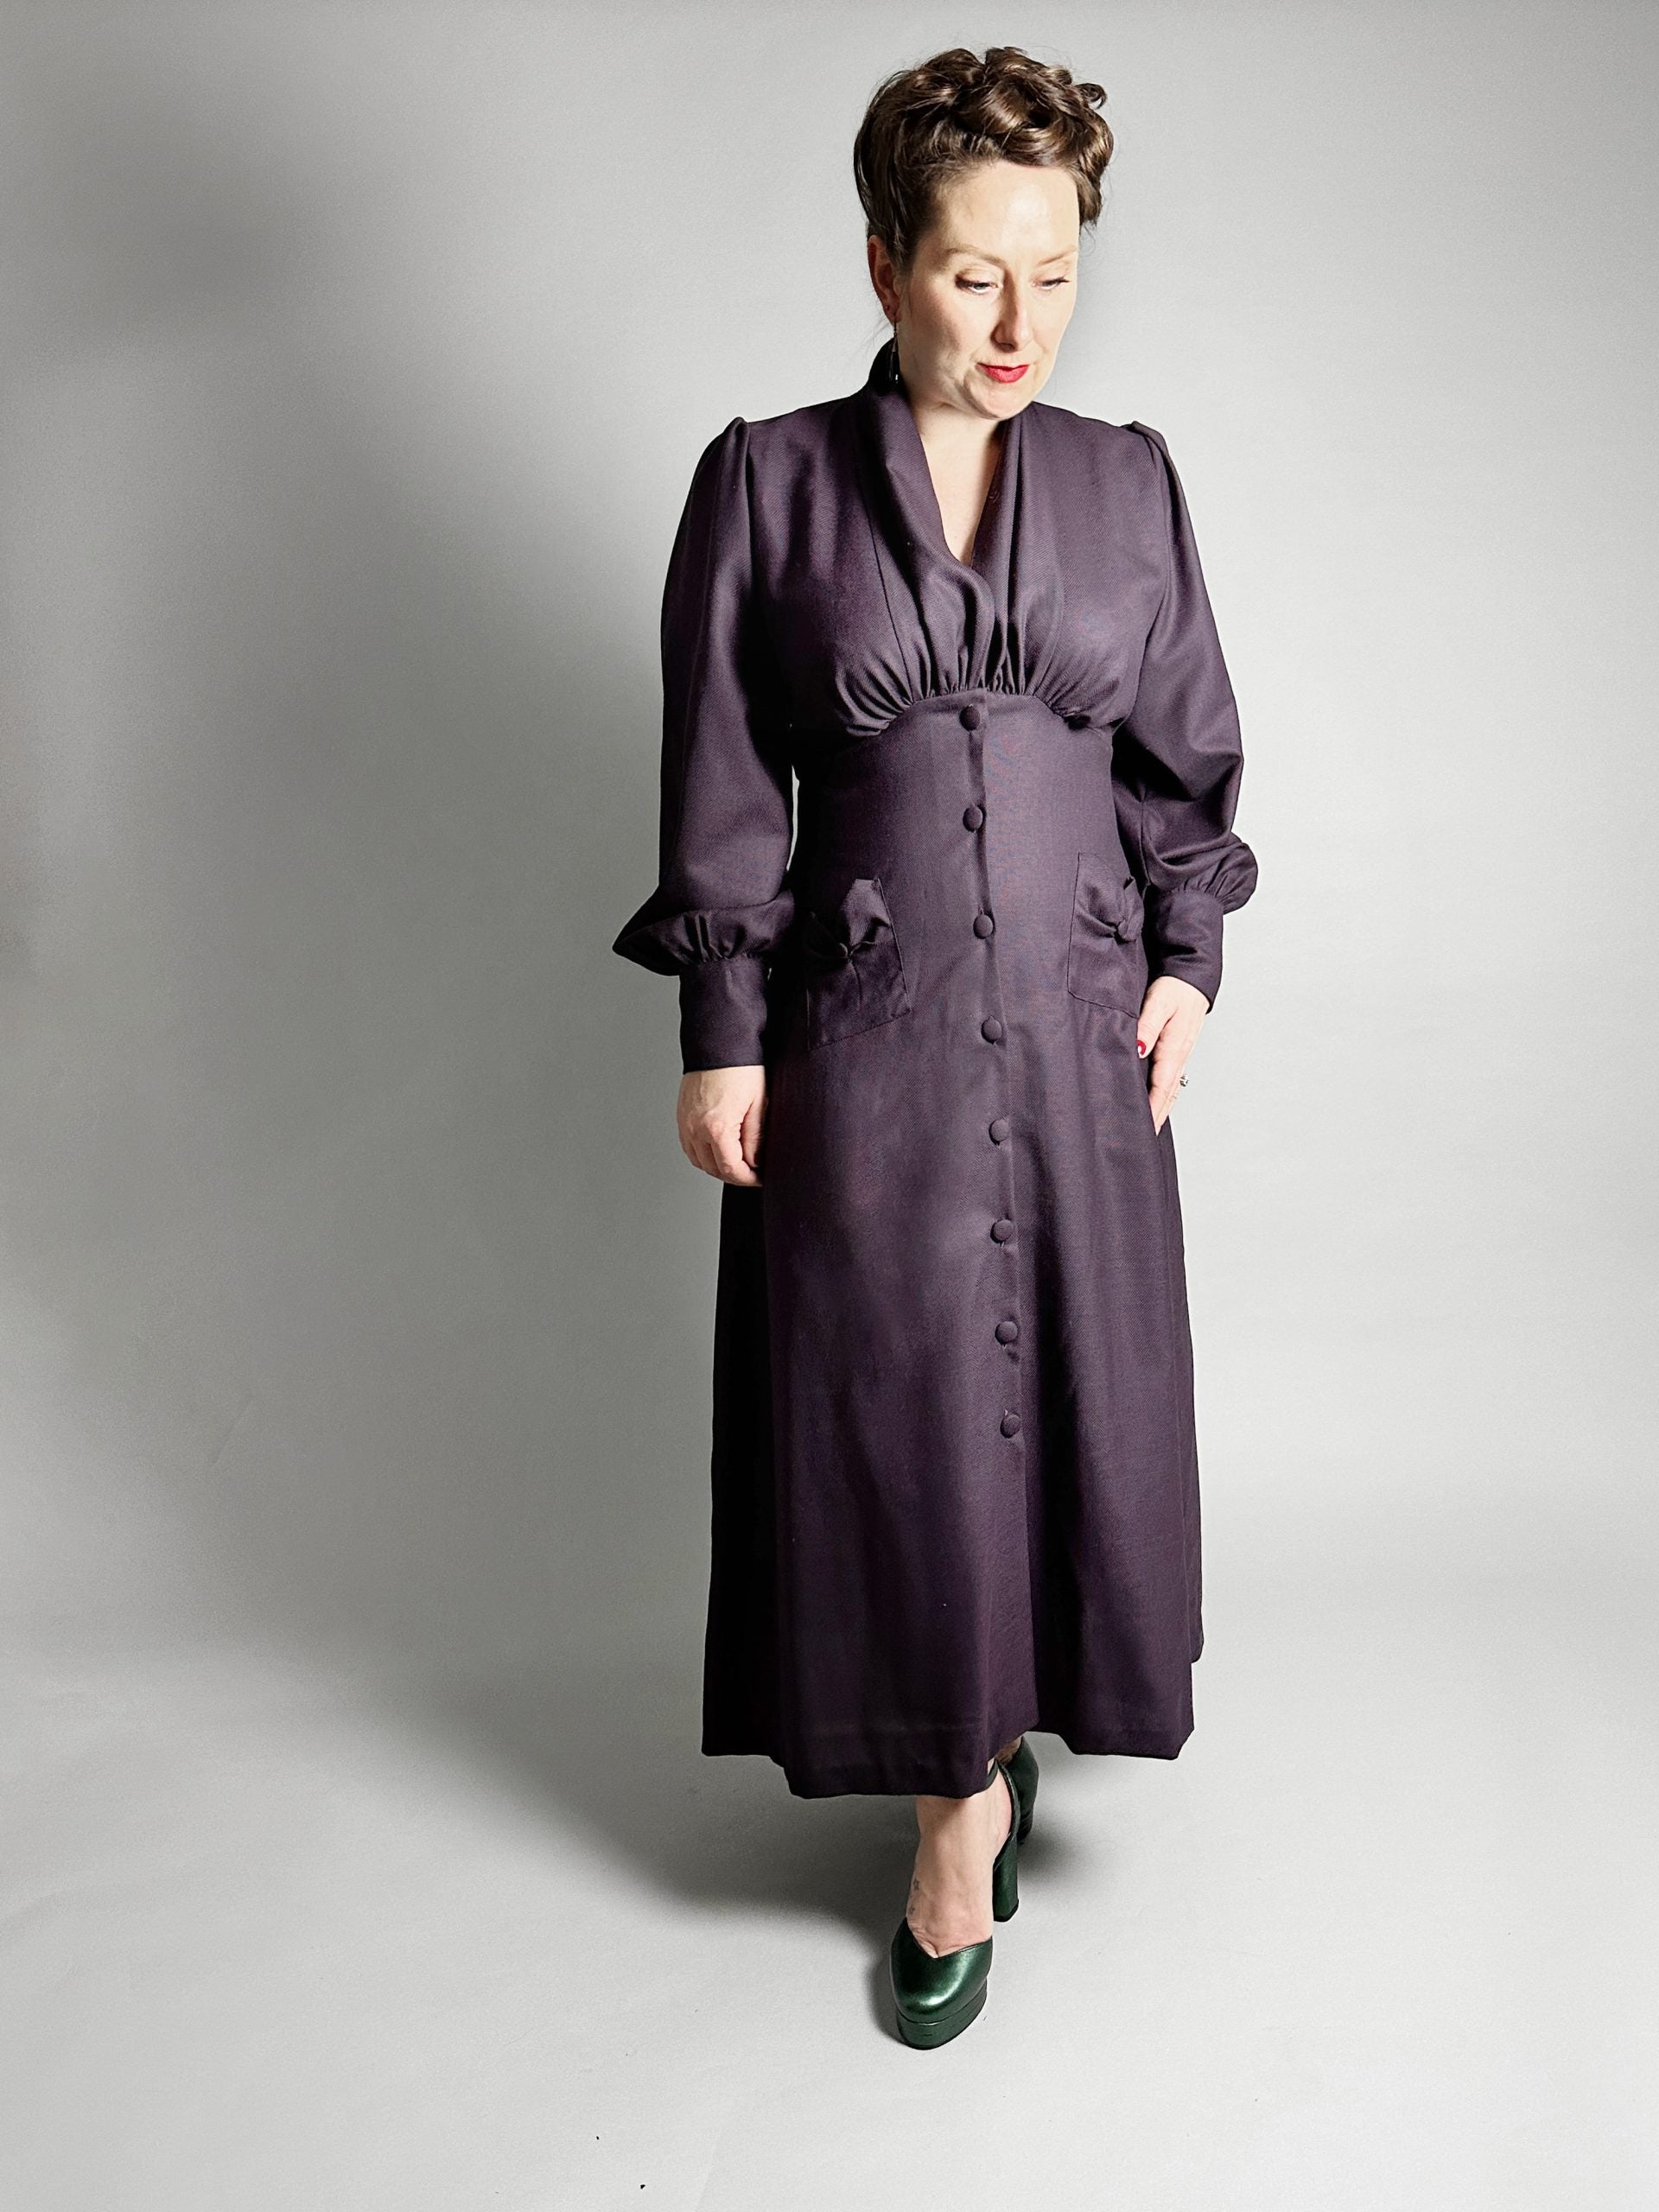 Woman wearing the No. 29 Milano Dress/Blouse sewing pattern from How to Do Fashion on The Fold Line. A dress pattern made in cotton, silk, wool, viscose, cupro, linen or polyester fabrics, featuring an empire line, high collar with gathers, deep V-neck, l